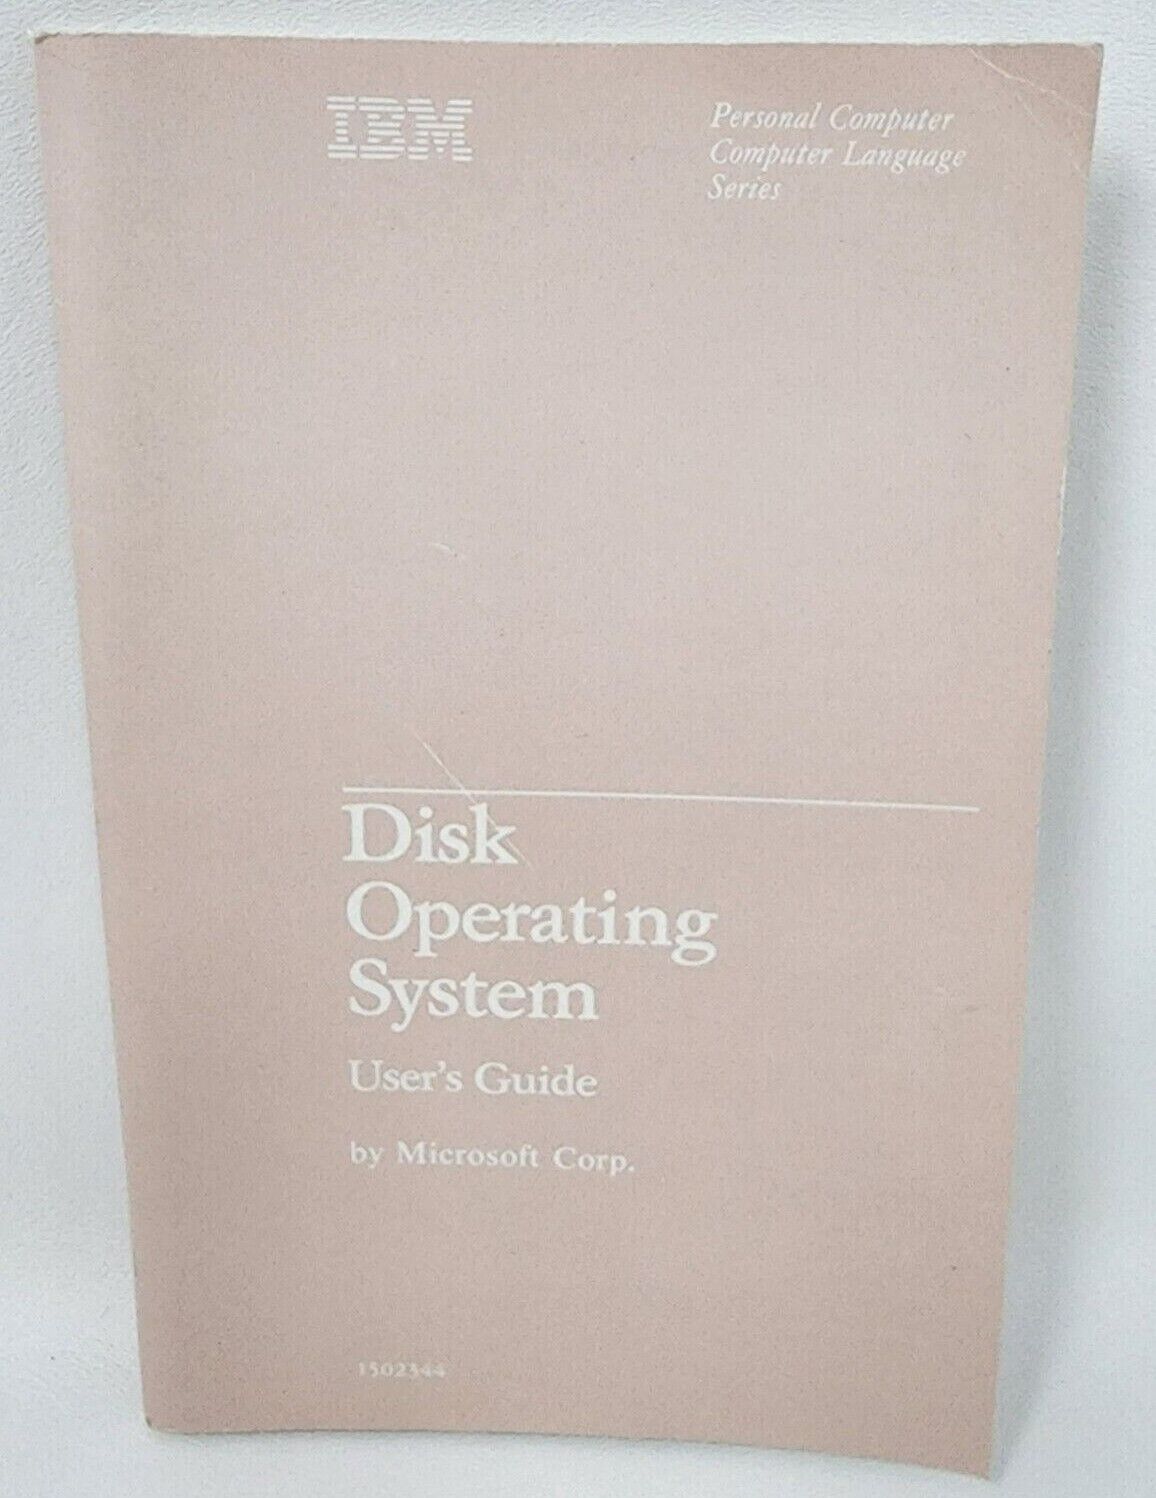 Microsoft IBM DOS Disk Operating System Users Guide 1502344 VTG 1983 Illustrated